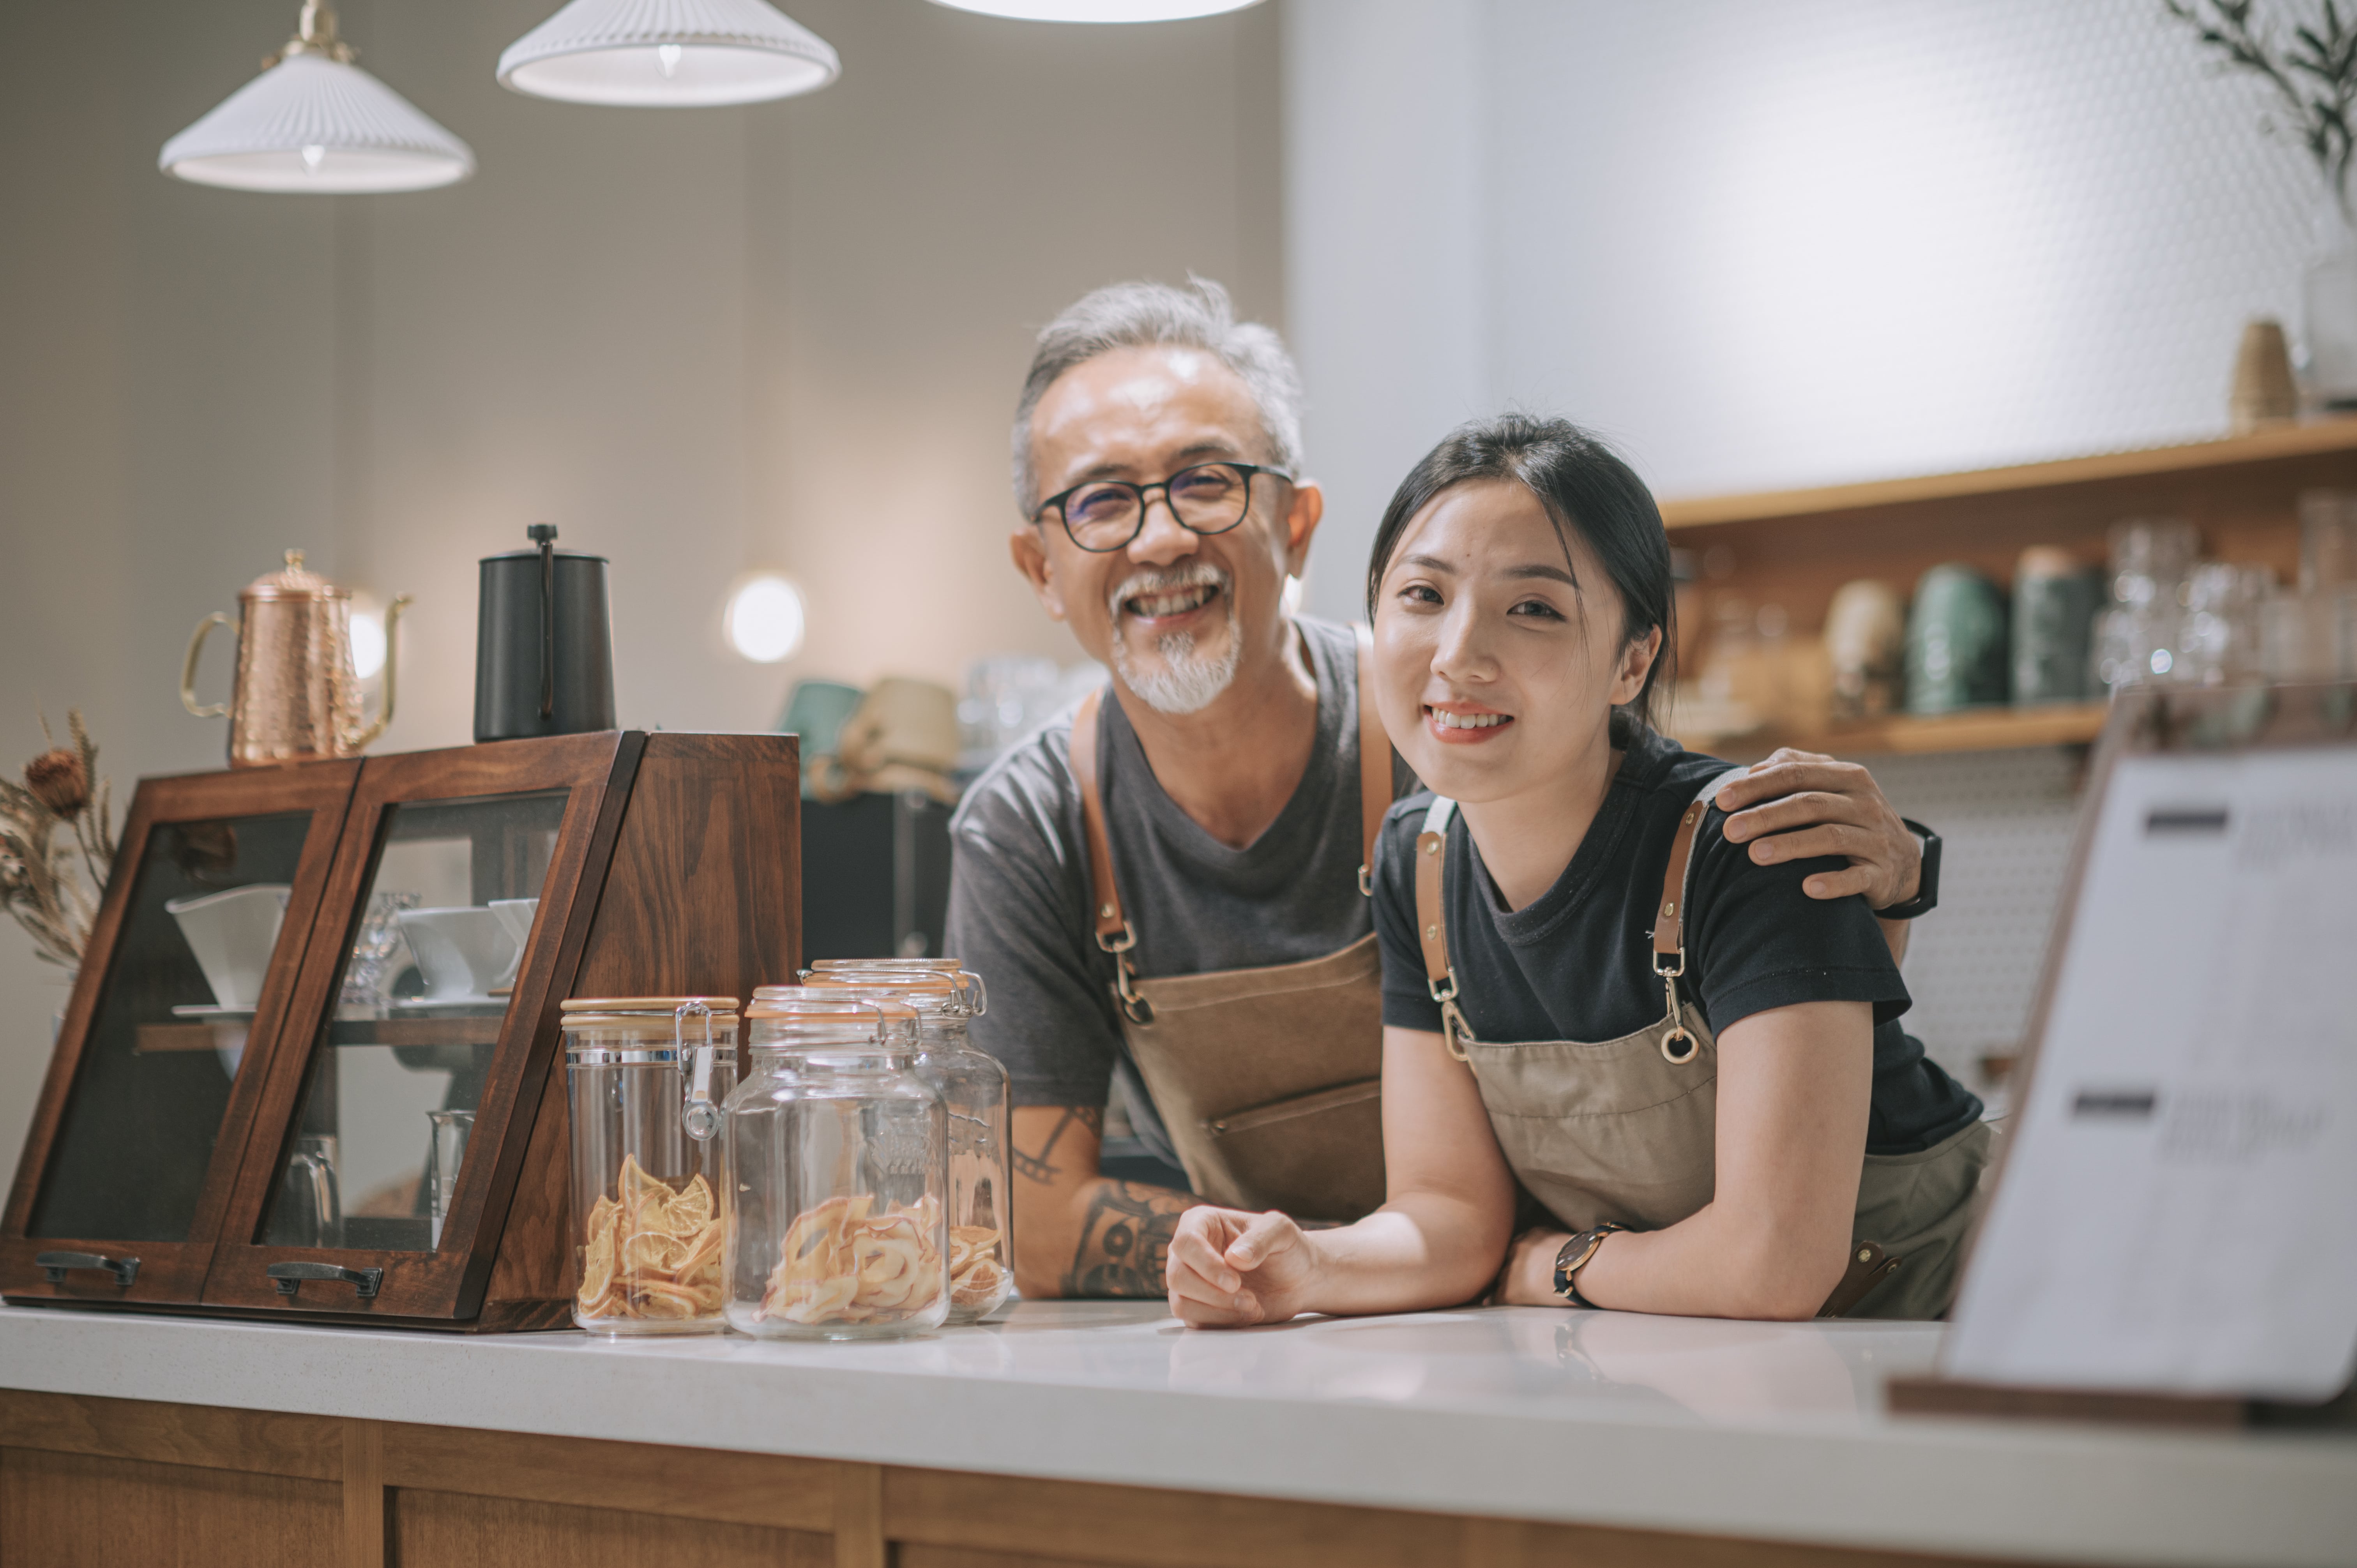  Man and woman wearing aprons standing behind a coffee counter